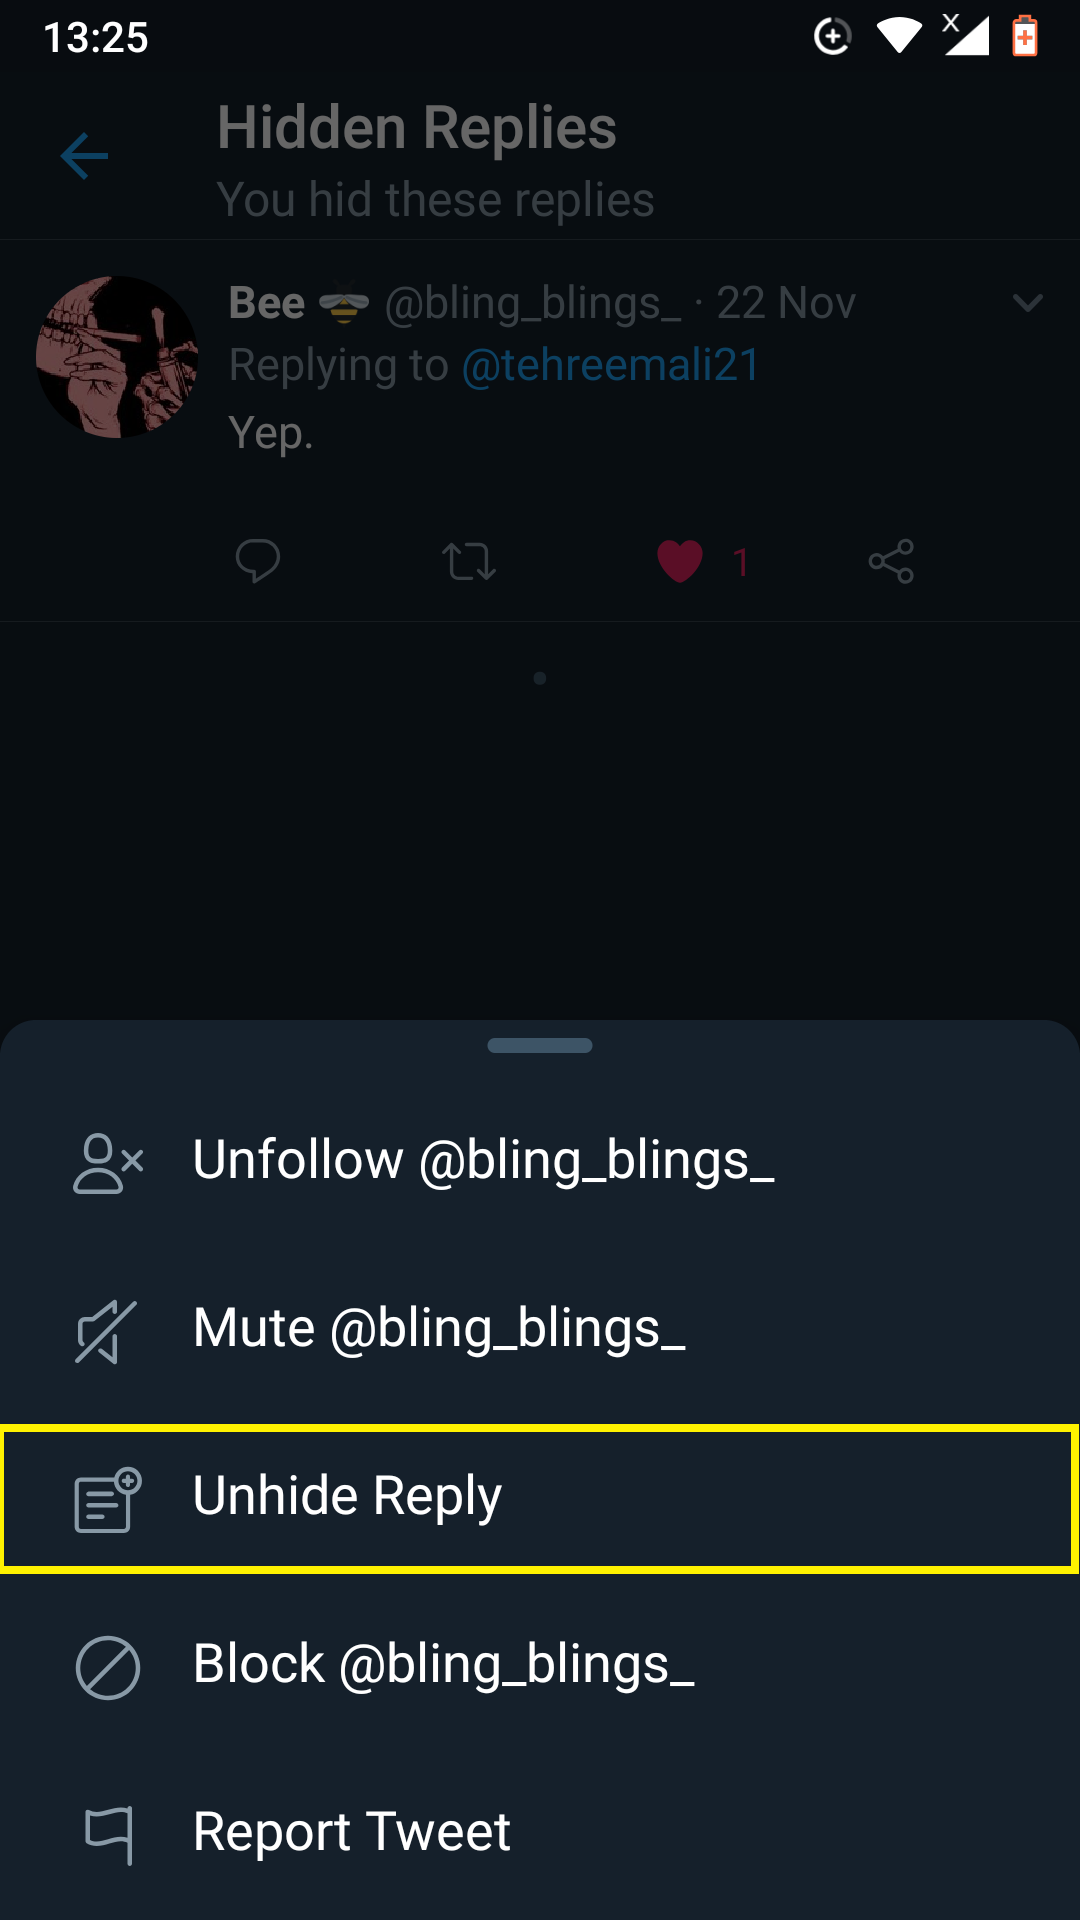 Learn how to hide and unhide replies to tweets with latest feature (Twitter 2019 update).